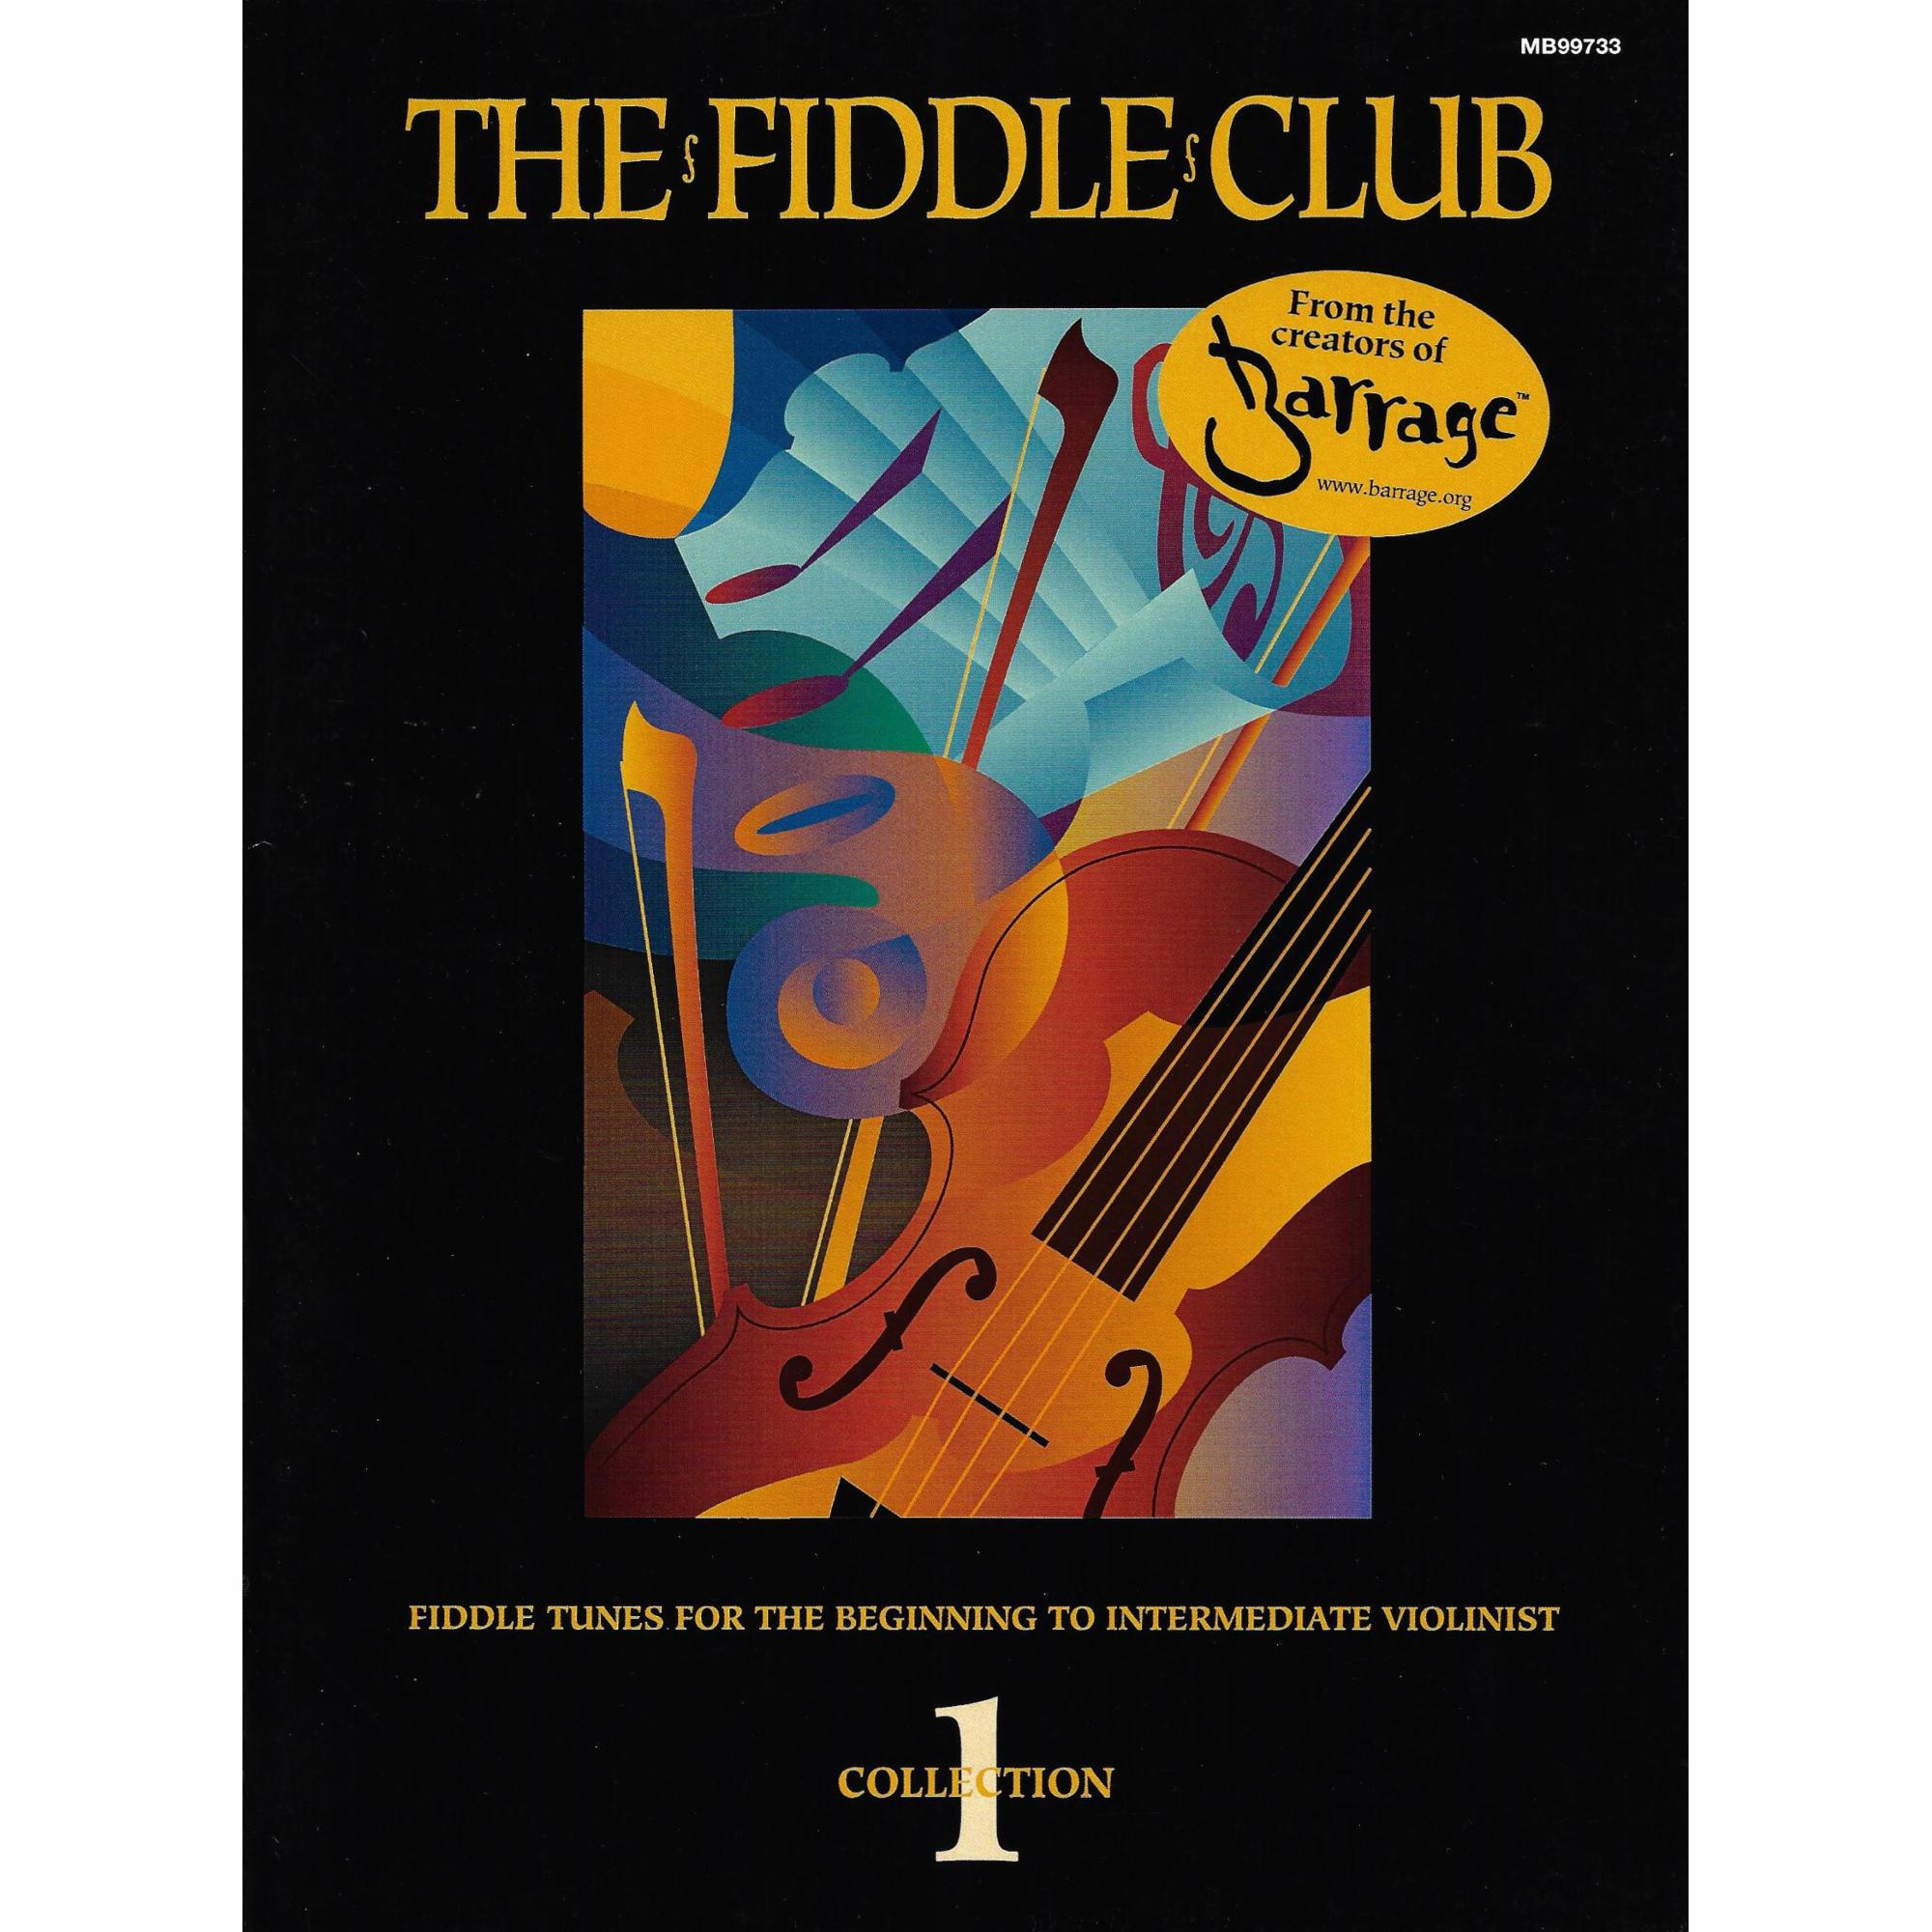 The Fiddle Club, Collections 1-3